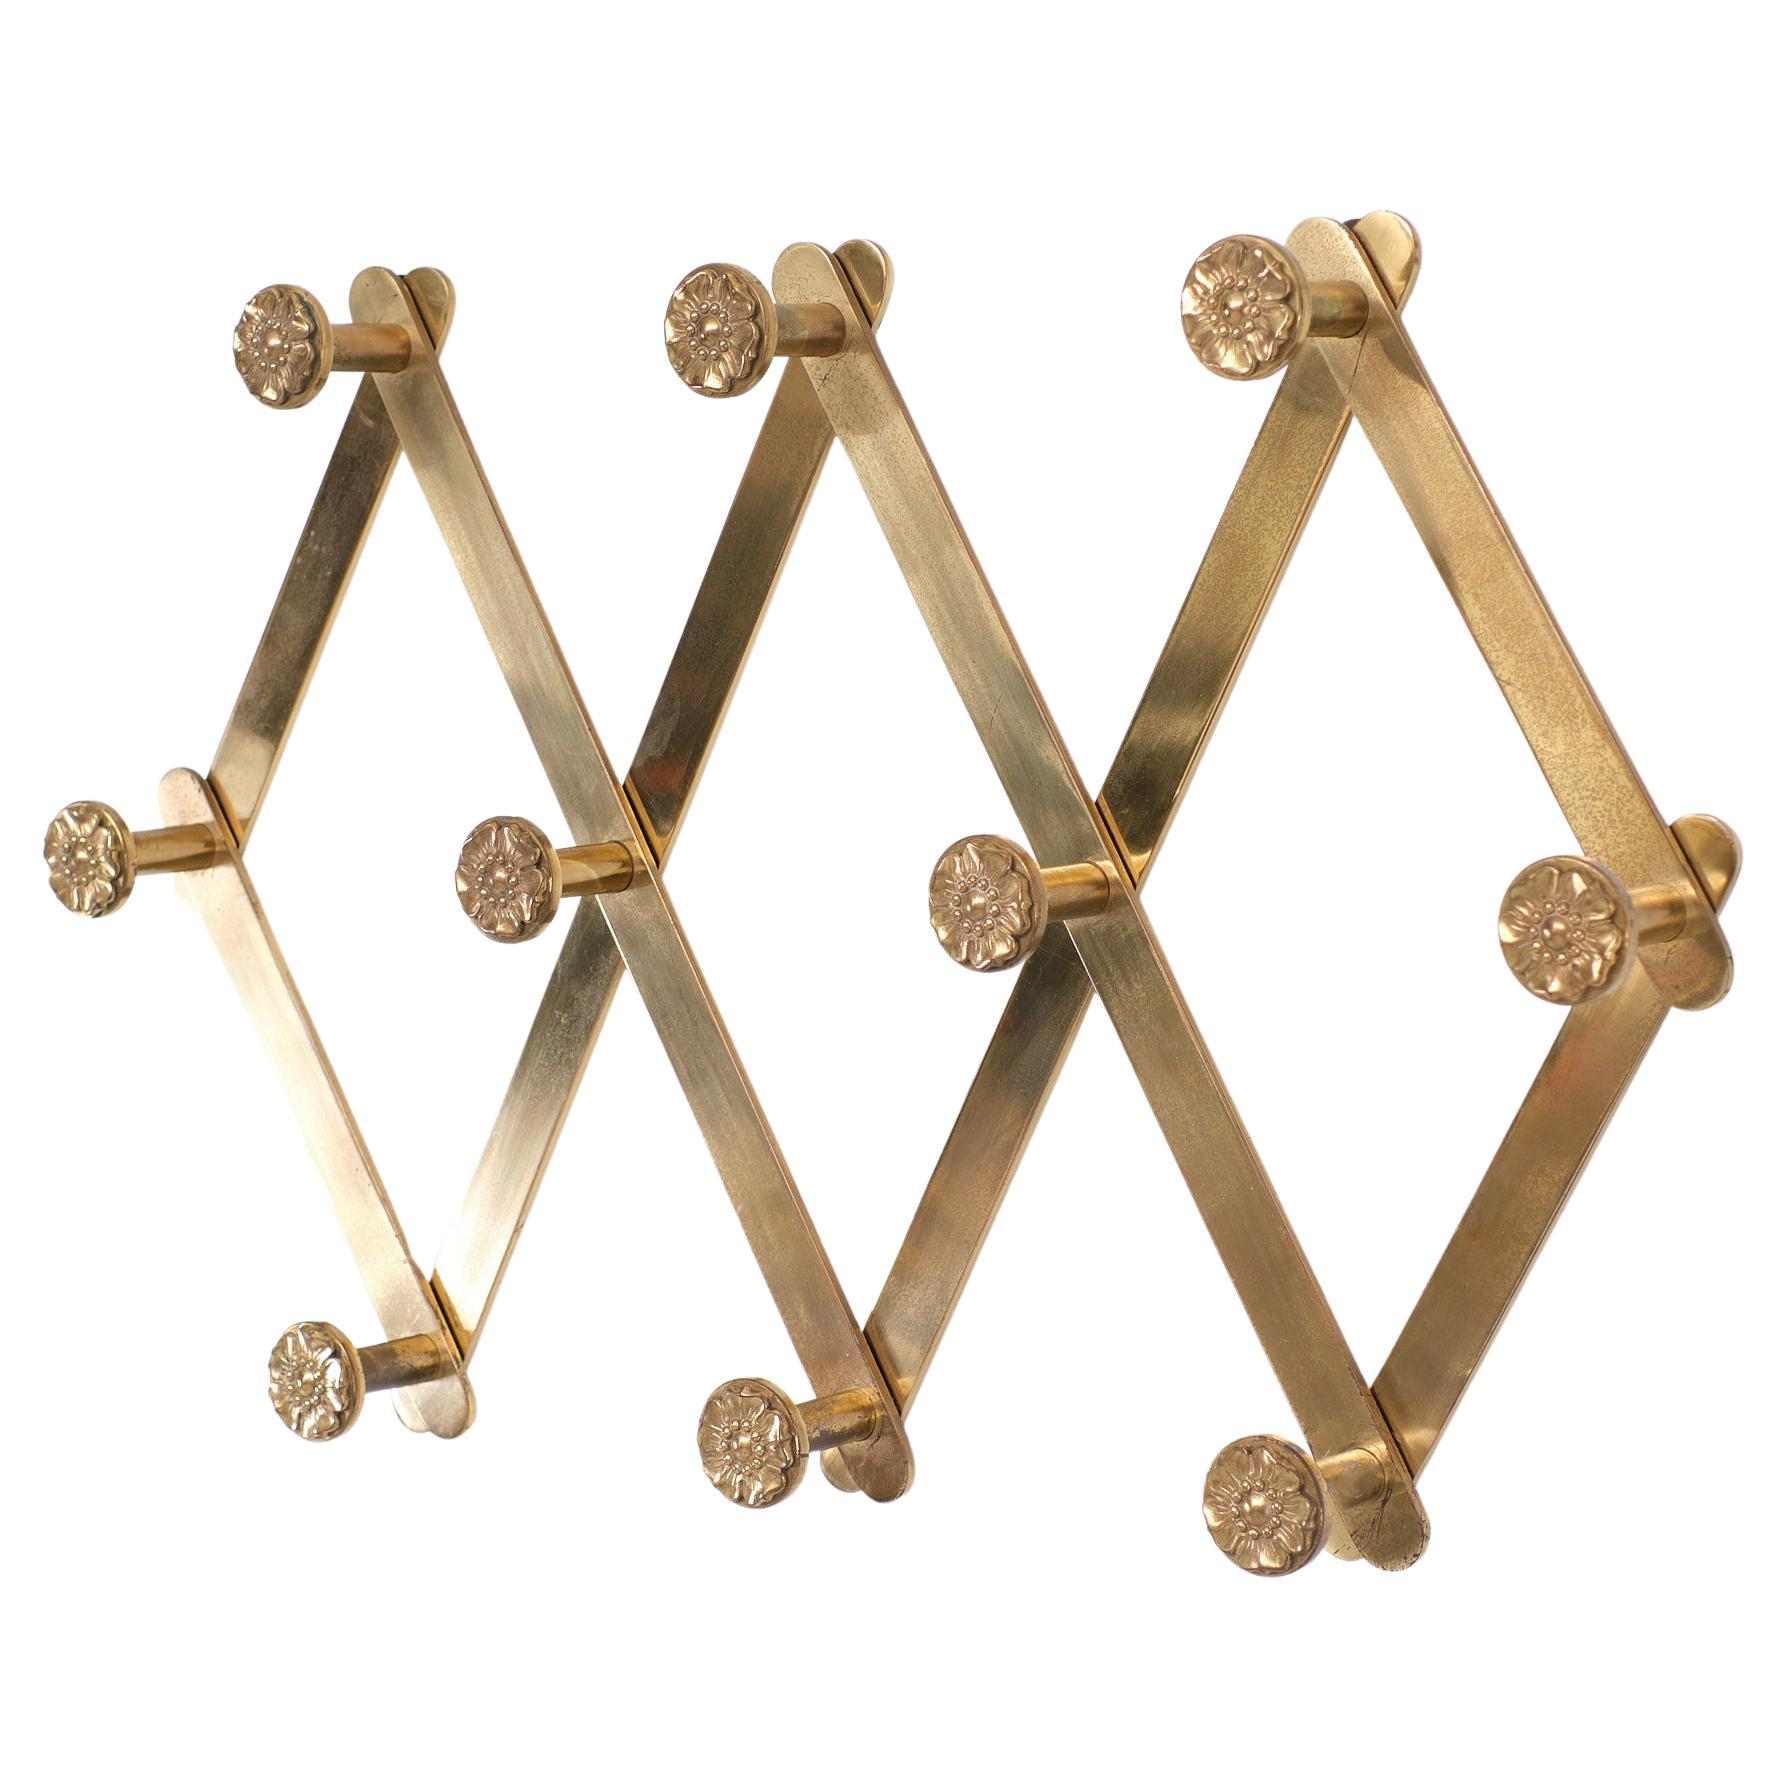 Top quality solid Brass wall coatrack .Harmonica shaped .Adjustable 
in width  . Ten Knobs with decorative Flowers .for your coats .
Very remarkable with this coatrack the original purchase receipt. bought by Warners high end store in The Haque for